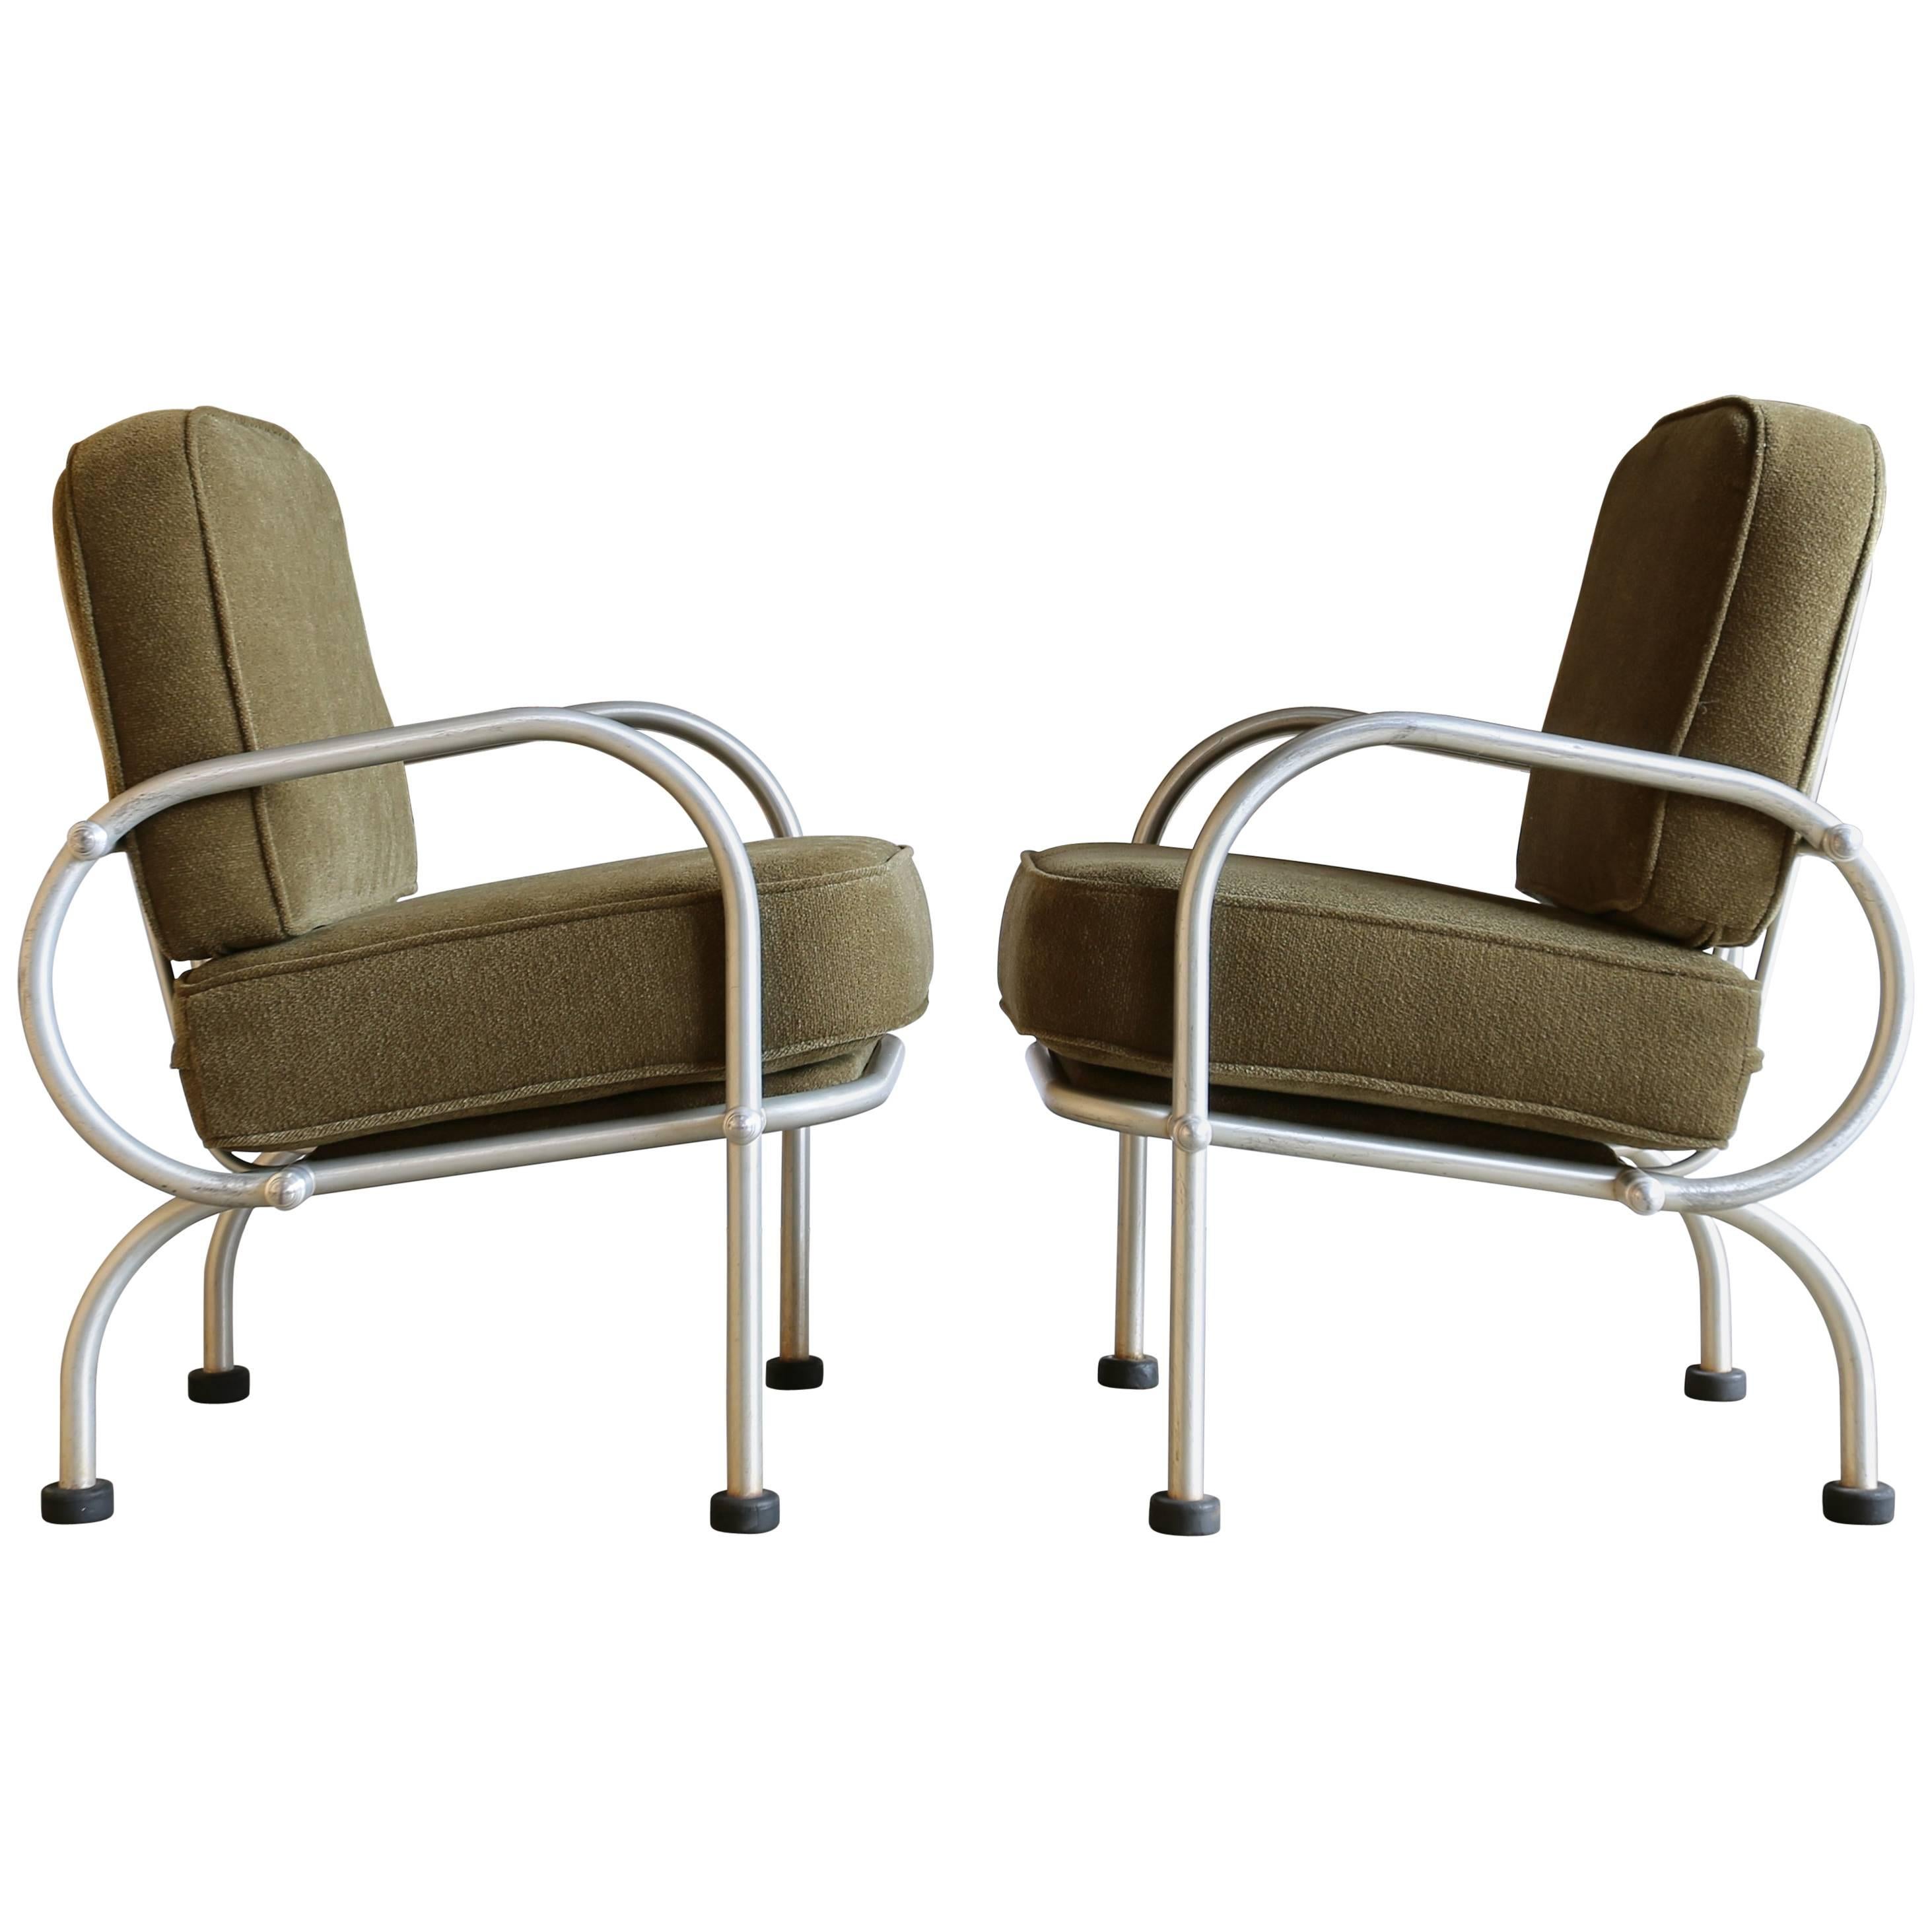 Pair of Lounge Chairs by Warren McArthur